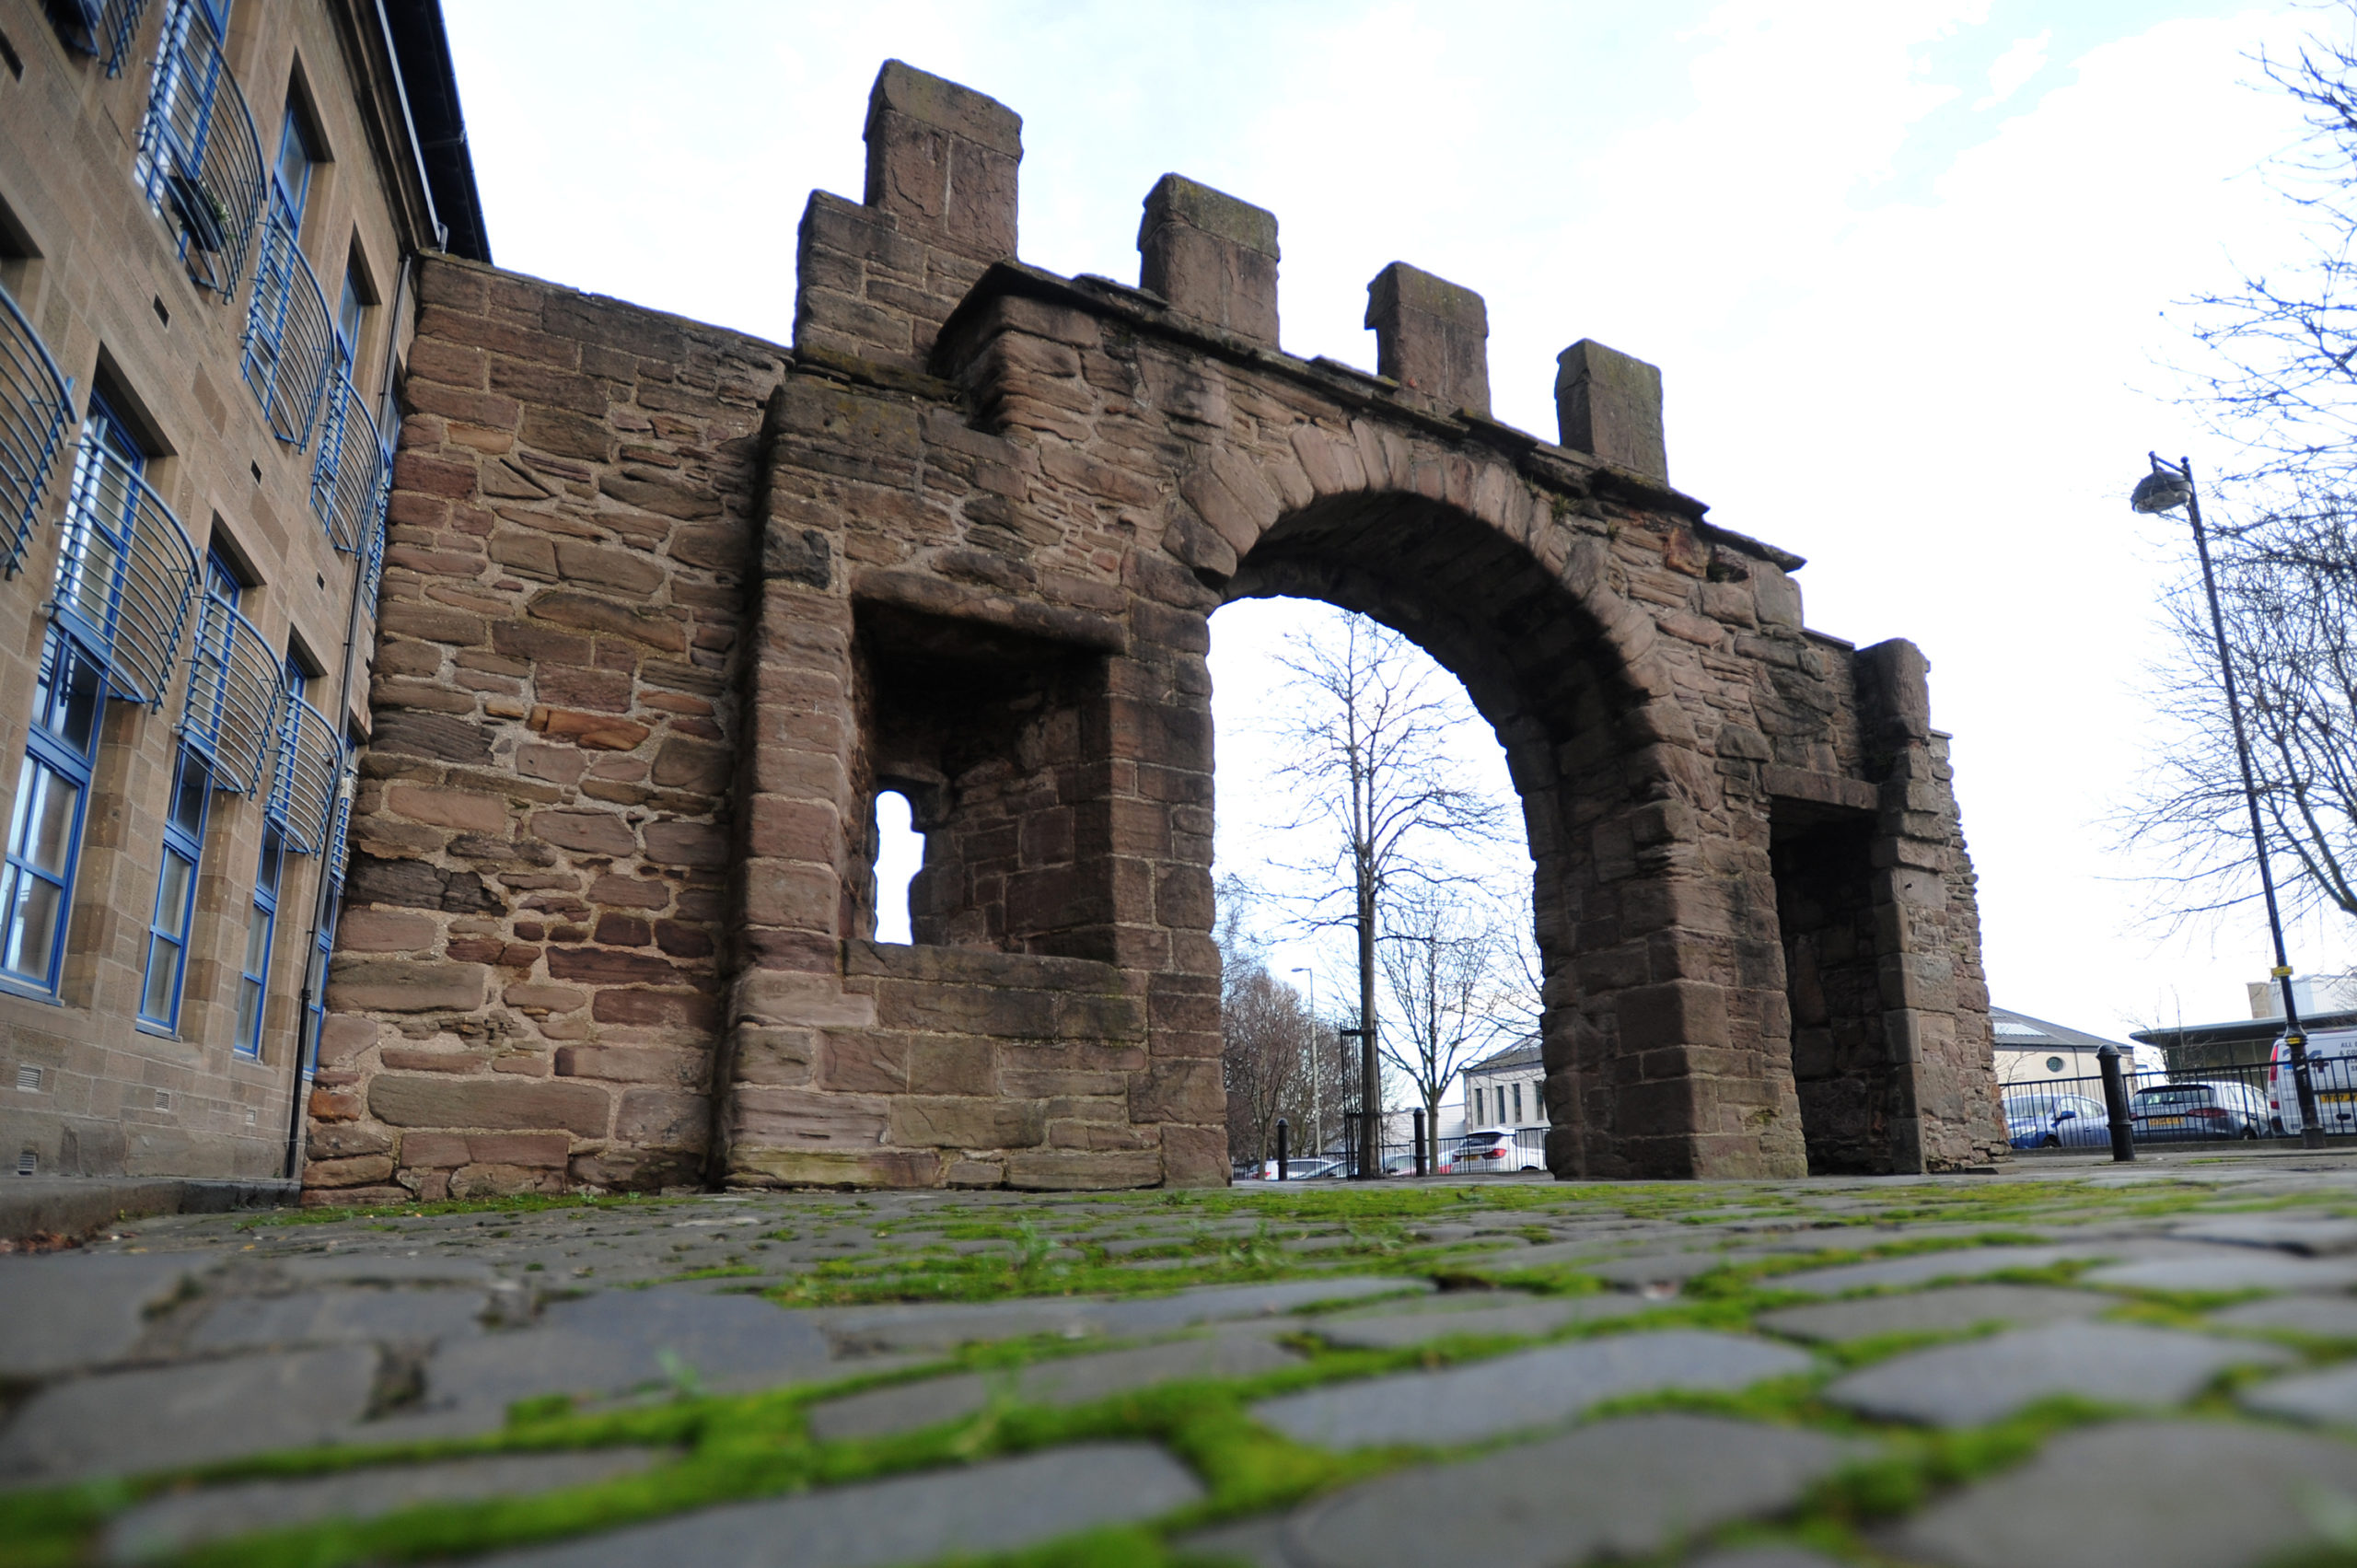 Pictured is the Wishart Arch, Dundee.